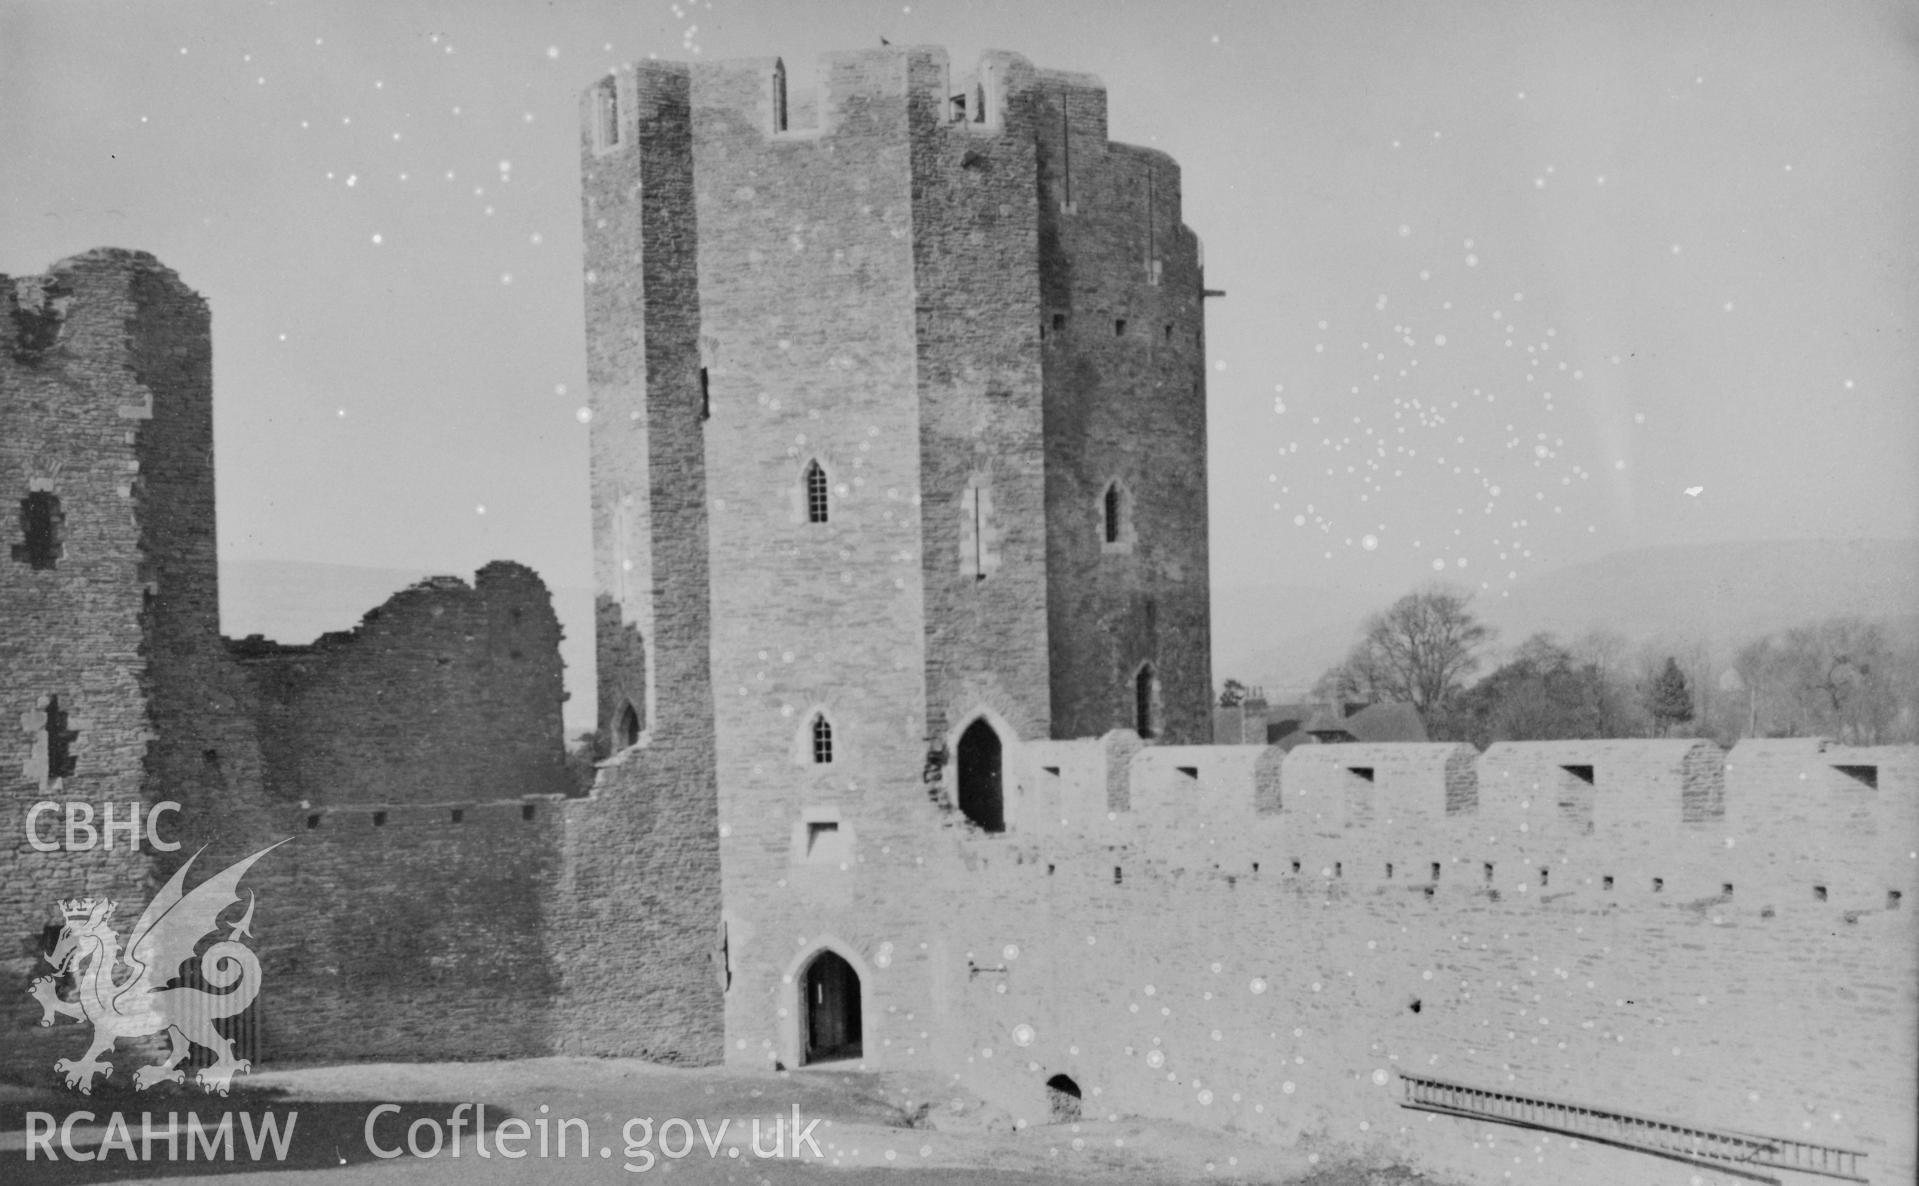 Black and white acetate negative showing Caerphilly Castle.